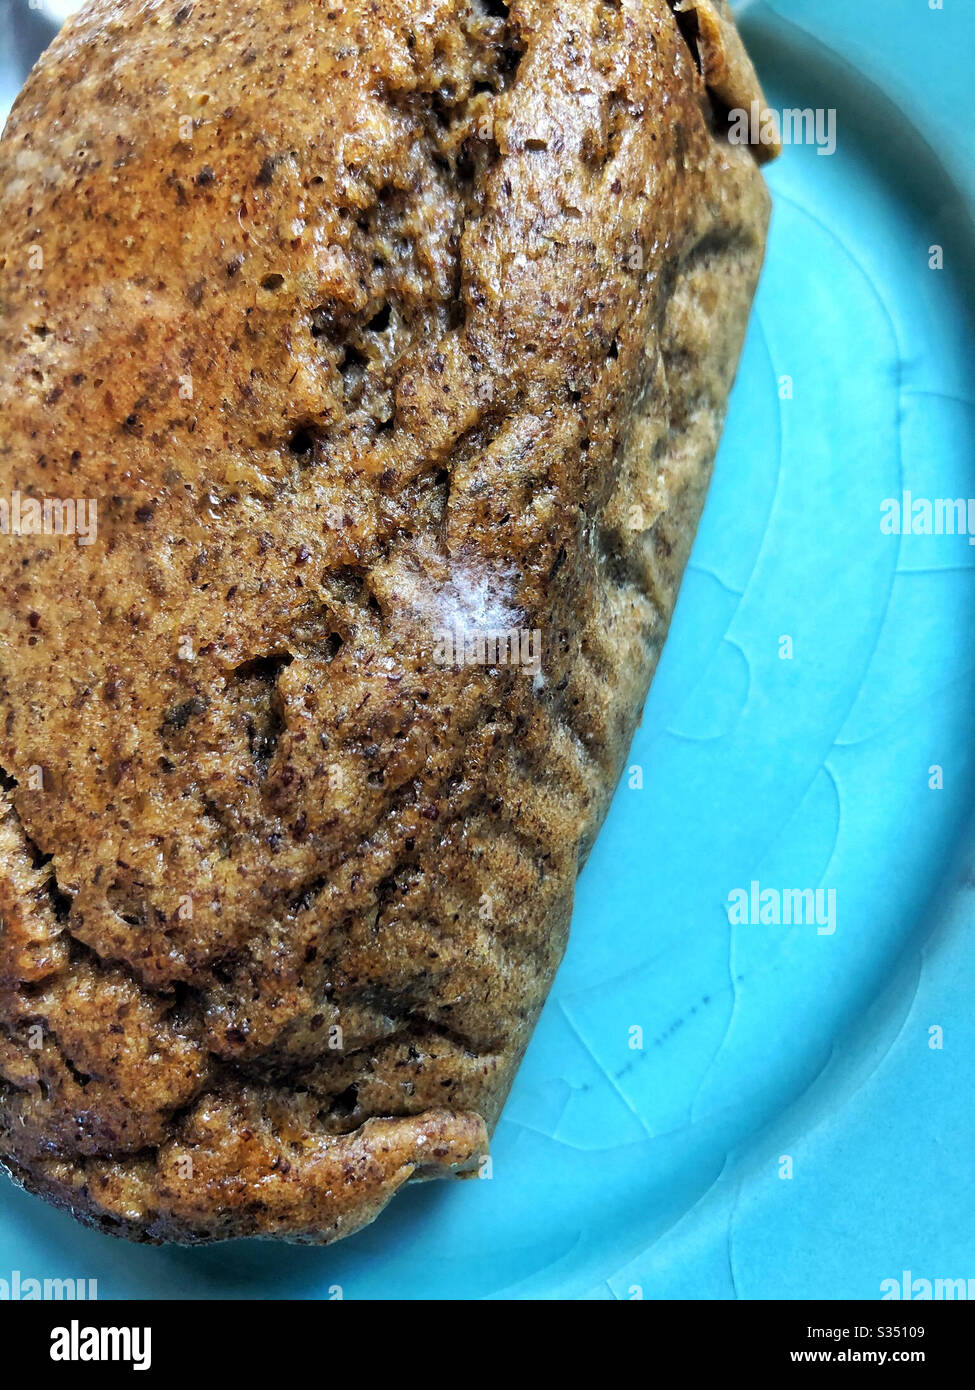 Mold on home made bread Stock Photo